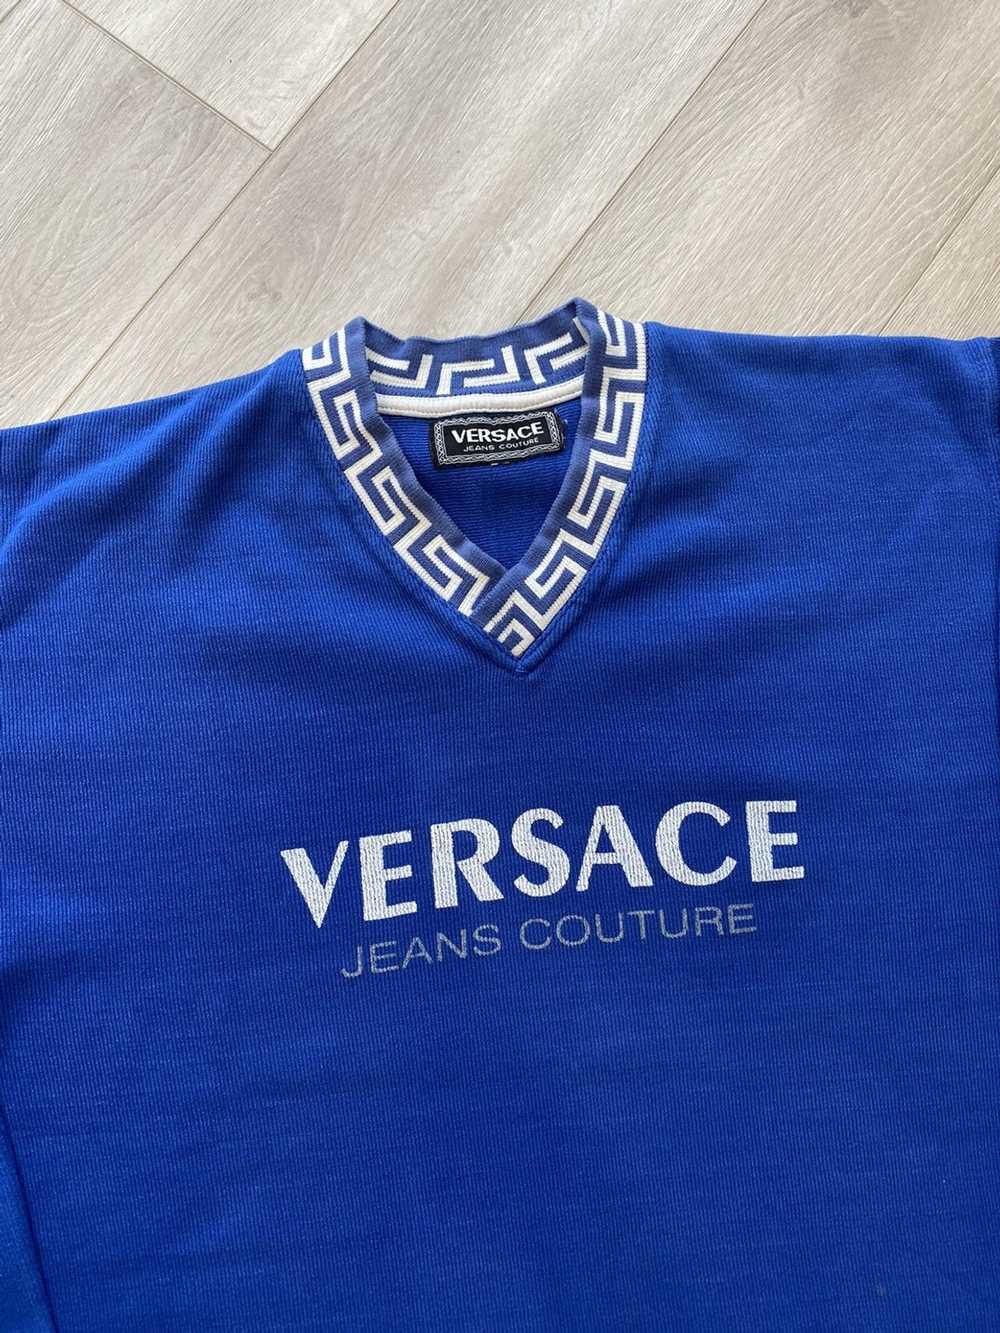 Versace × Versace Jeans Couture 90s Rare VERSACE … - image 2